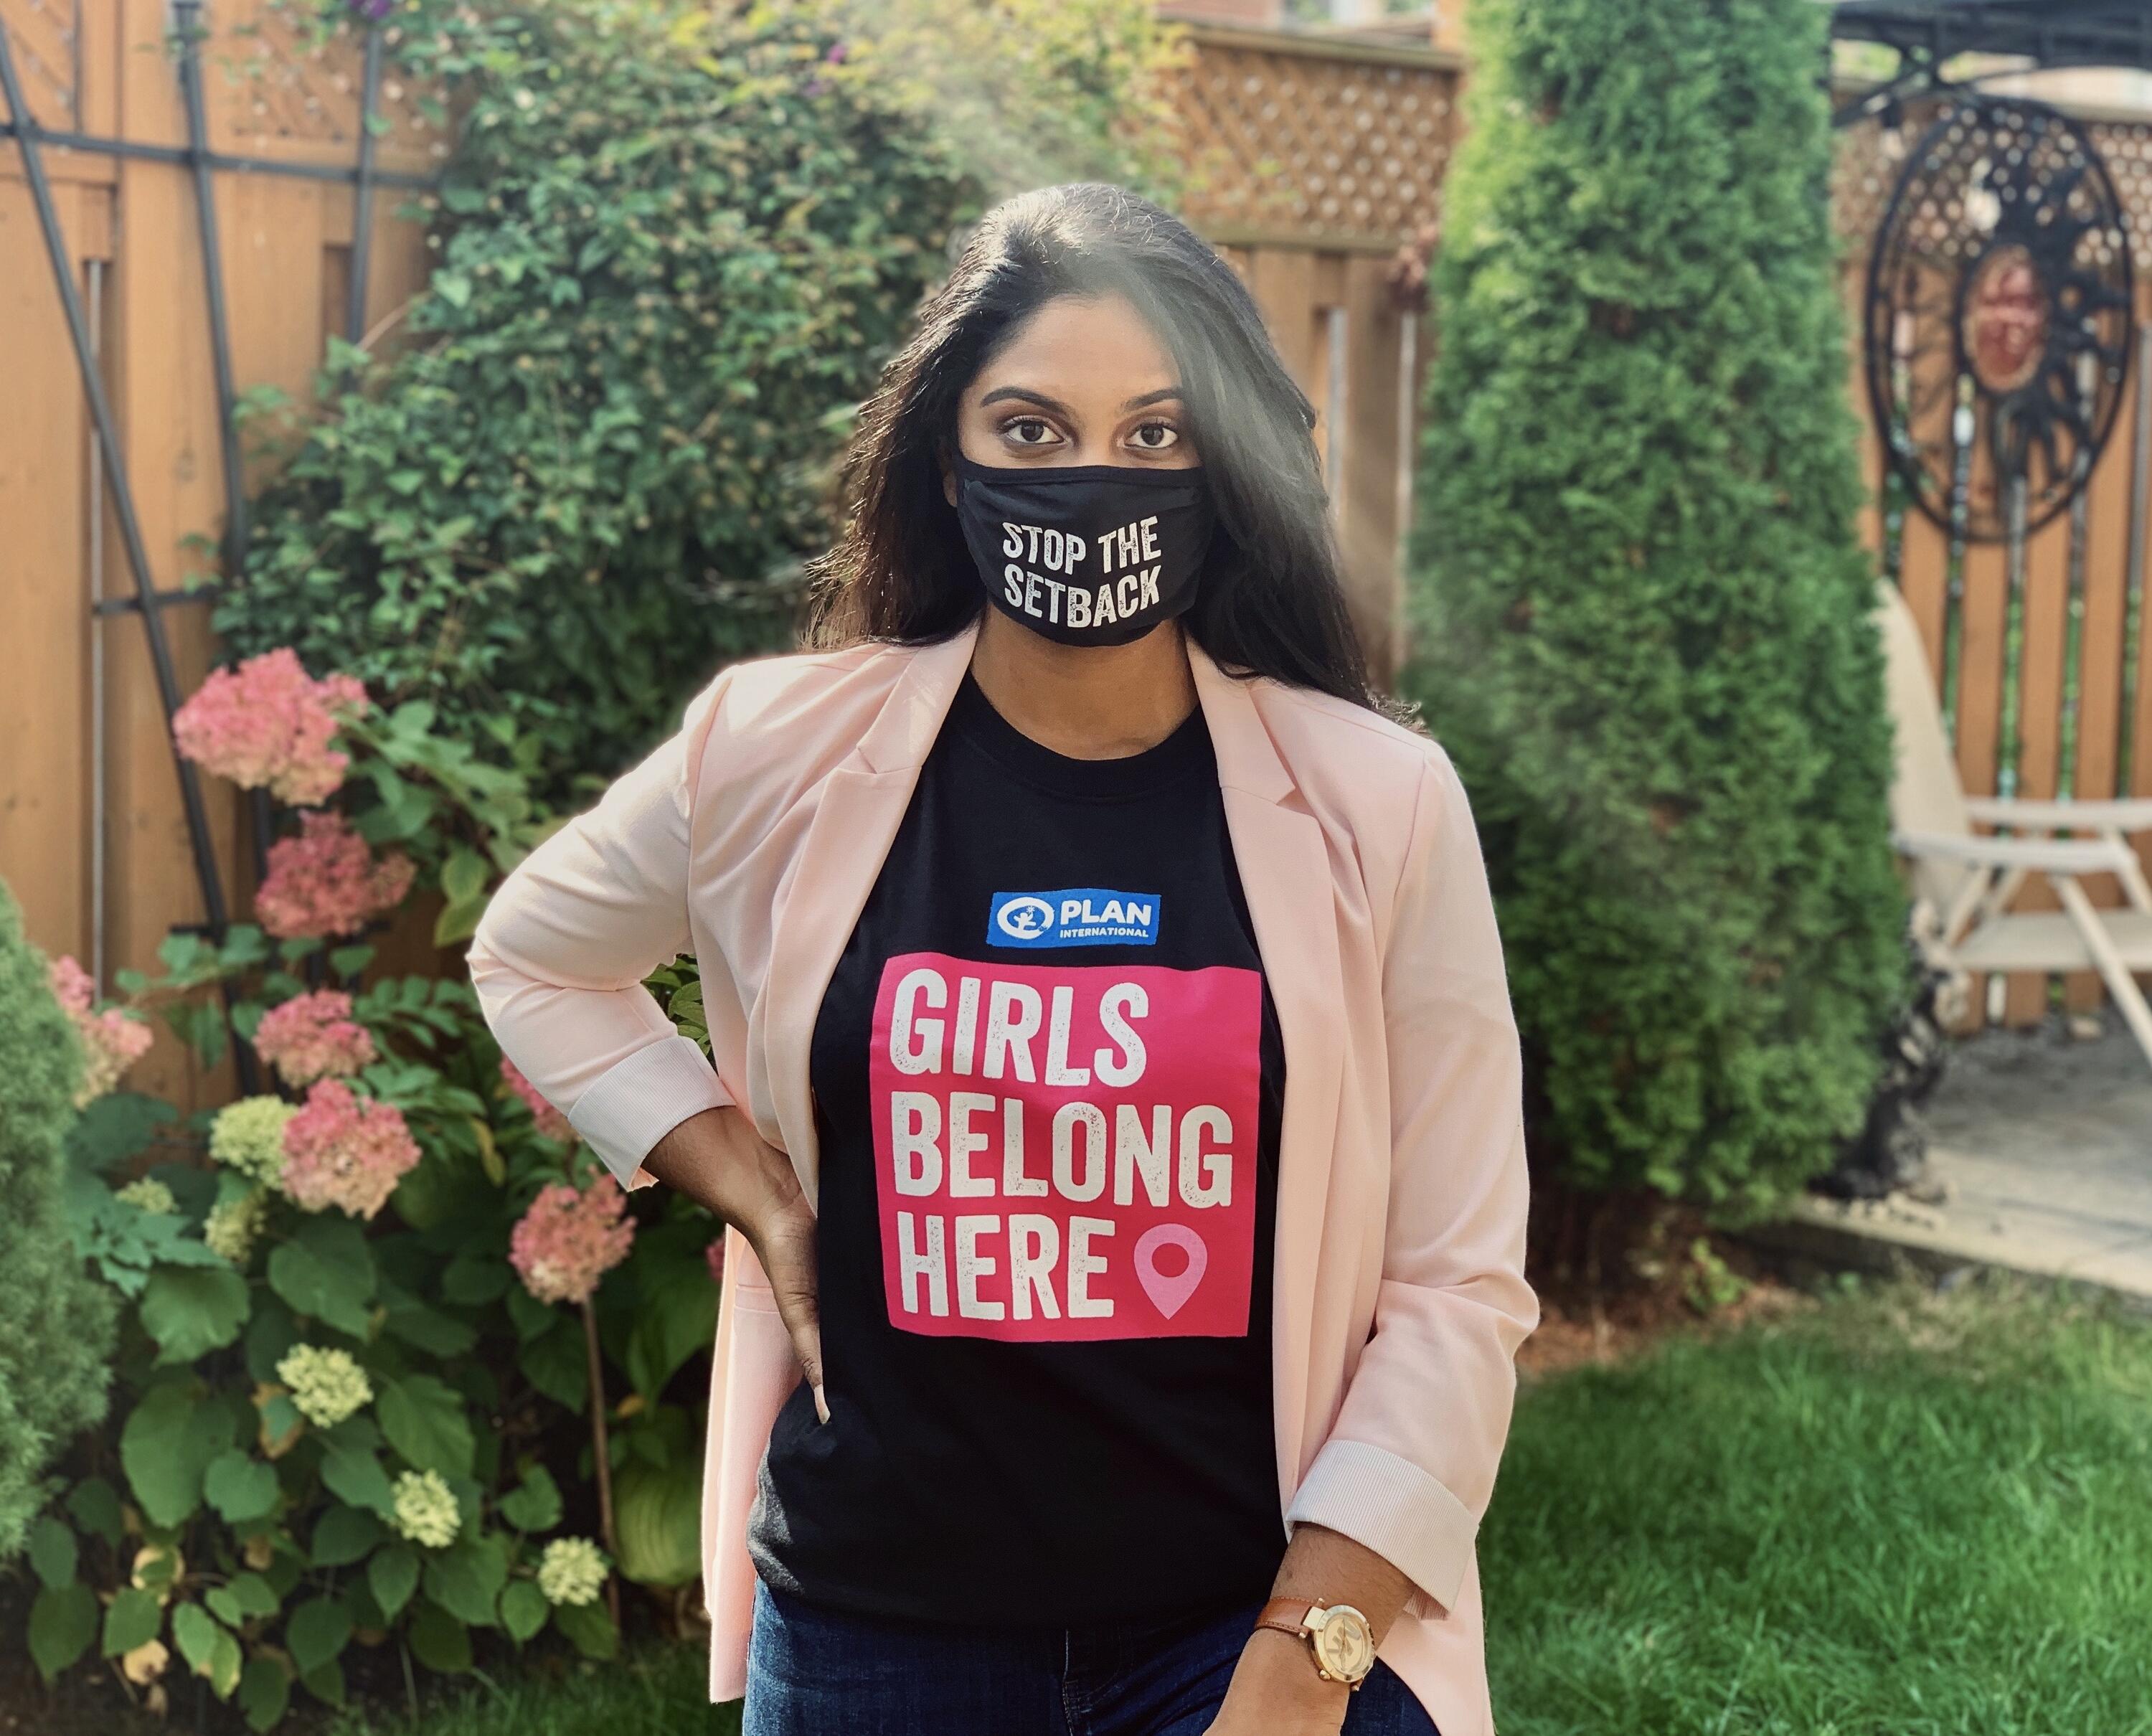 Sophia wearing a shirt that says 'girls belong here' a mask that reads 'stop the setbacl'.